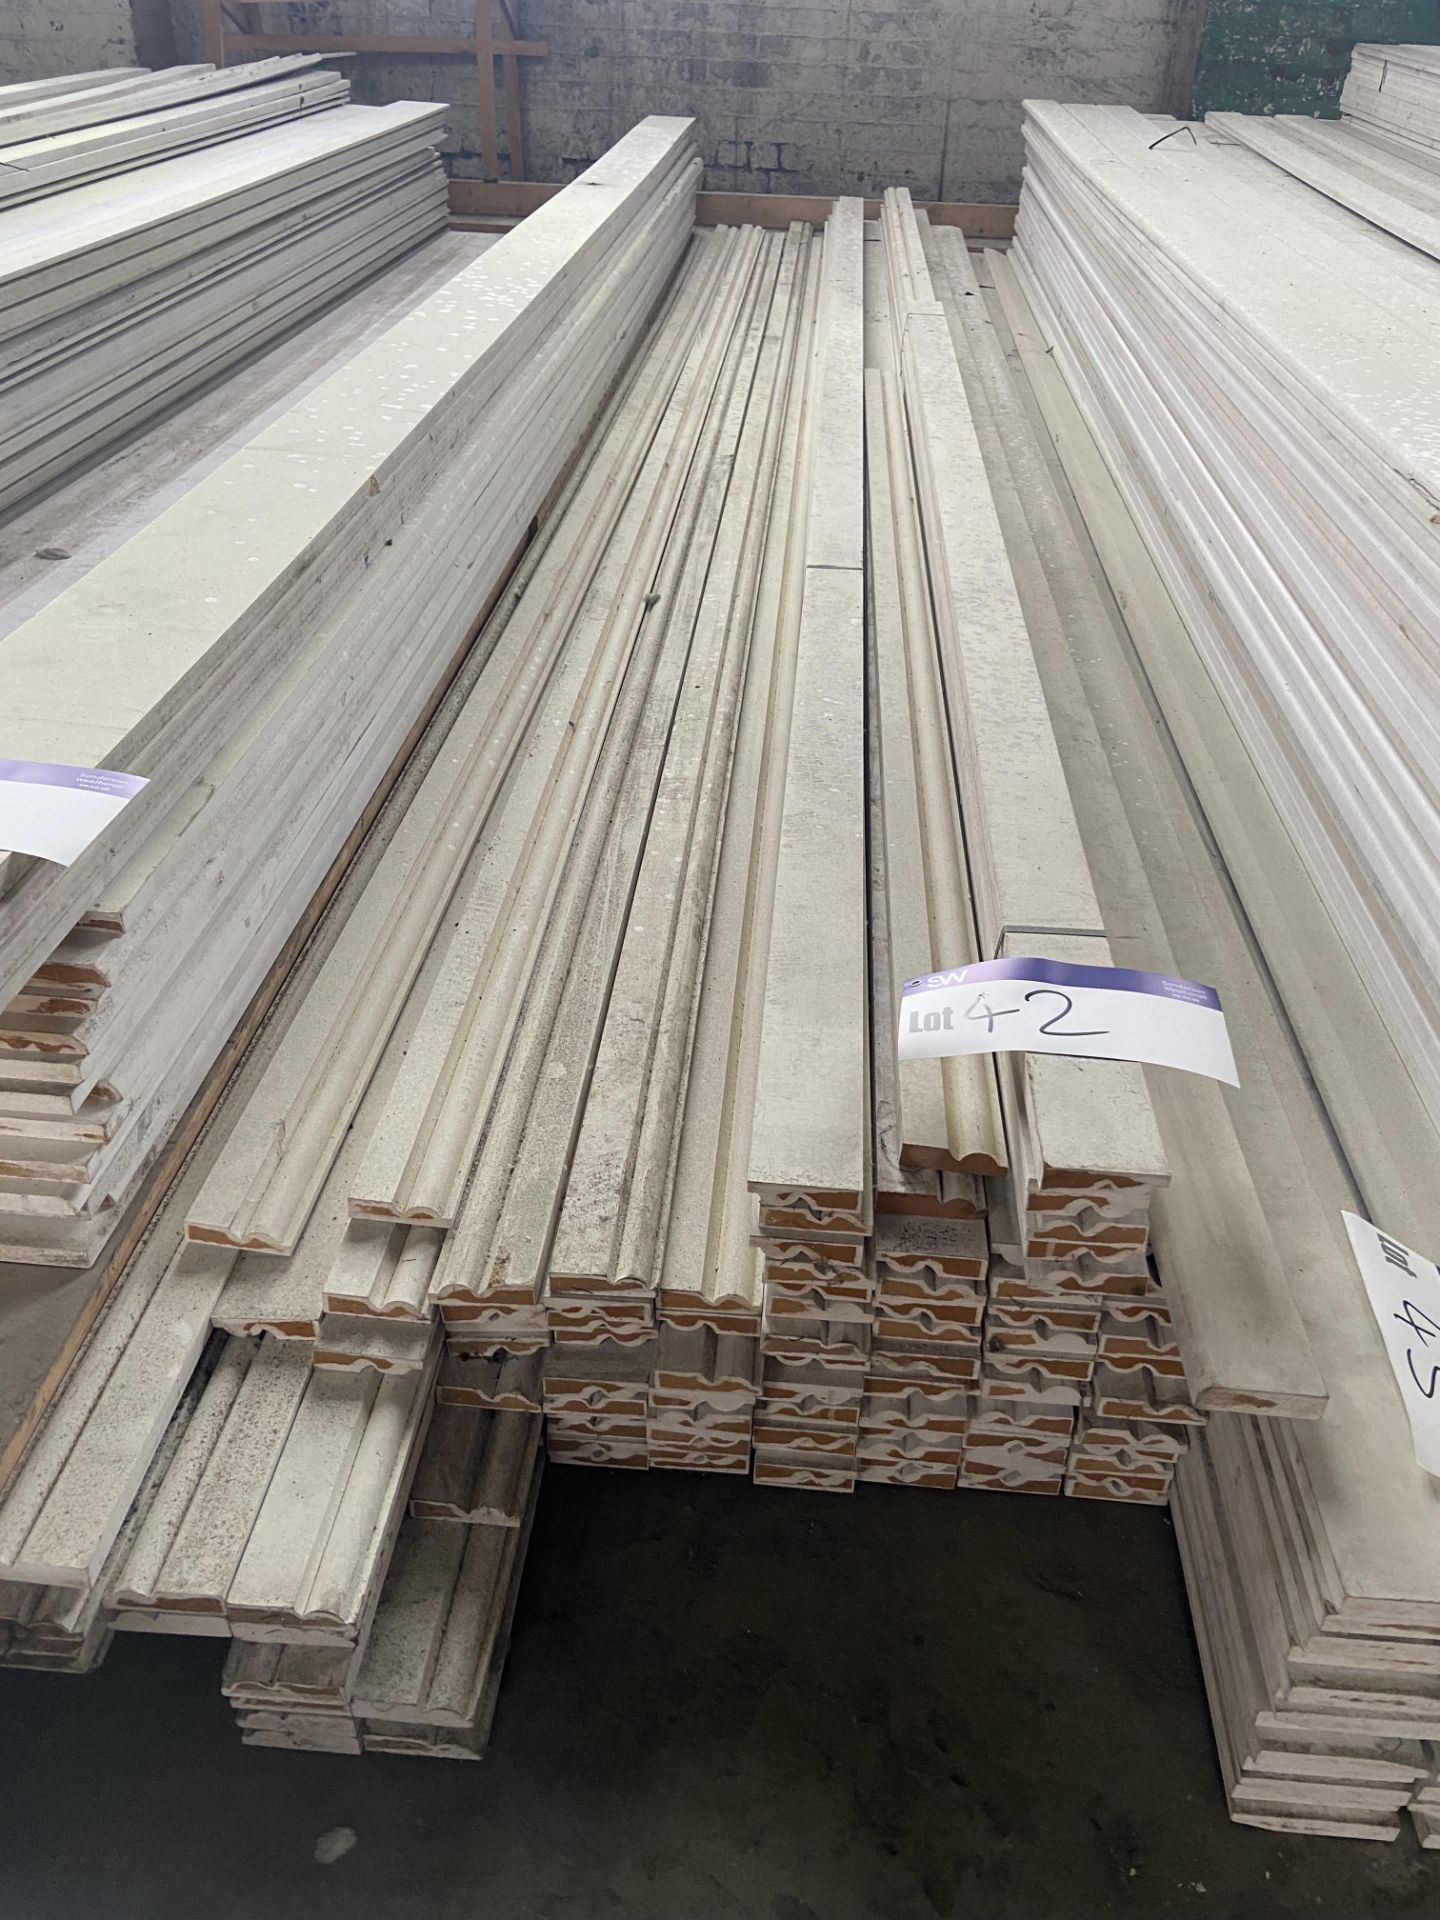 Approx. 130 Lengths of MDF Primed Tarus Architrave, each approx. 75mm x 18mm x 4.2m long, as set out